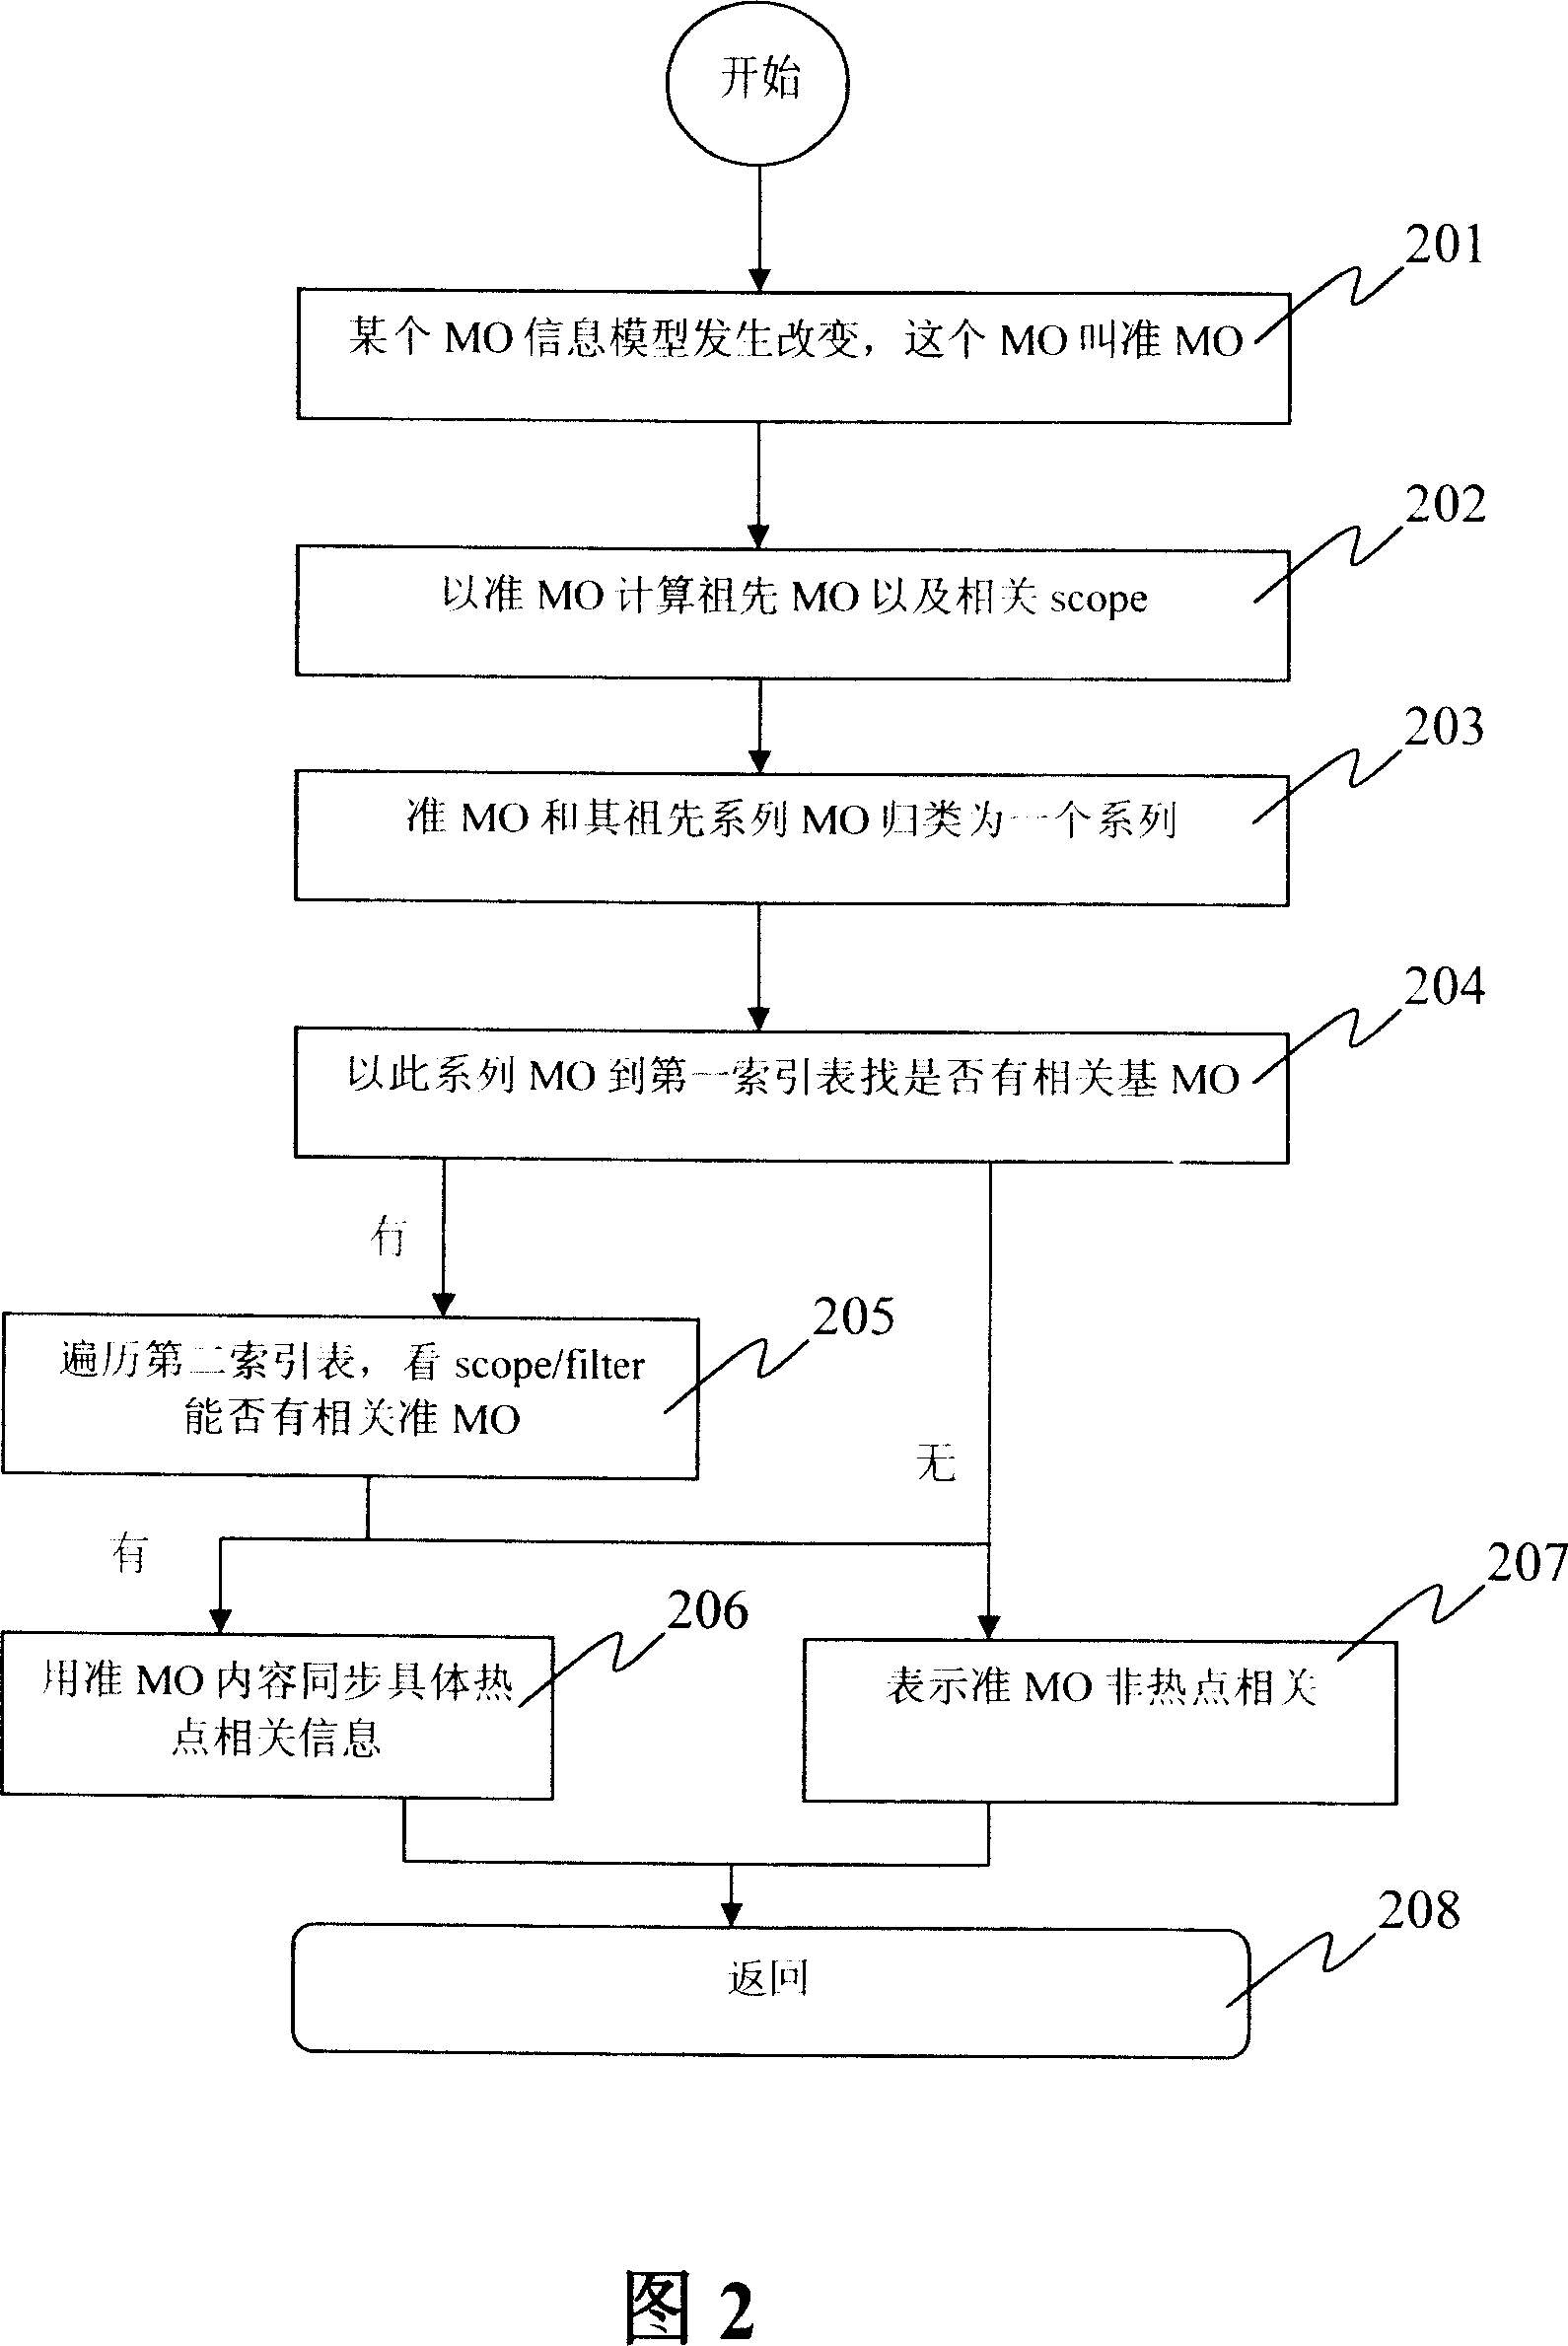 Method to rapid access information model